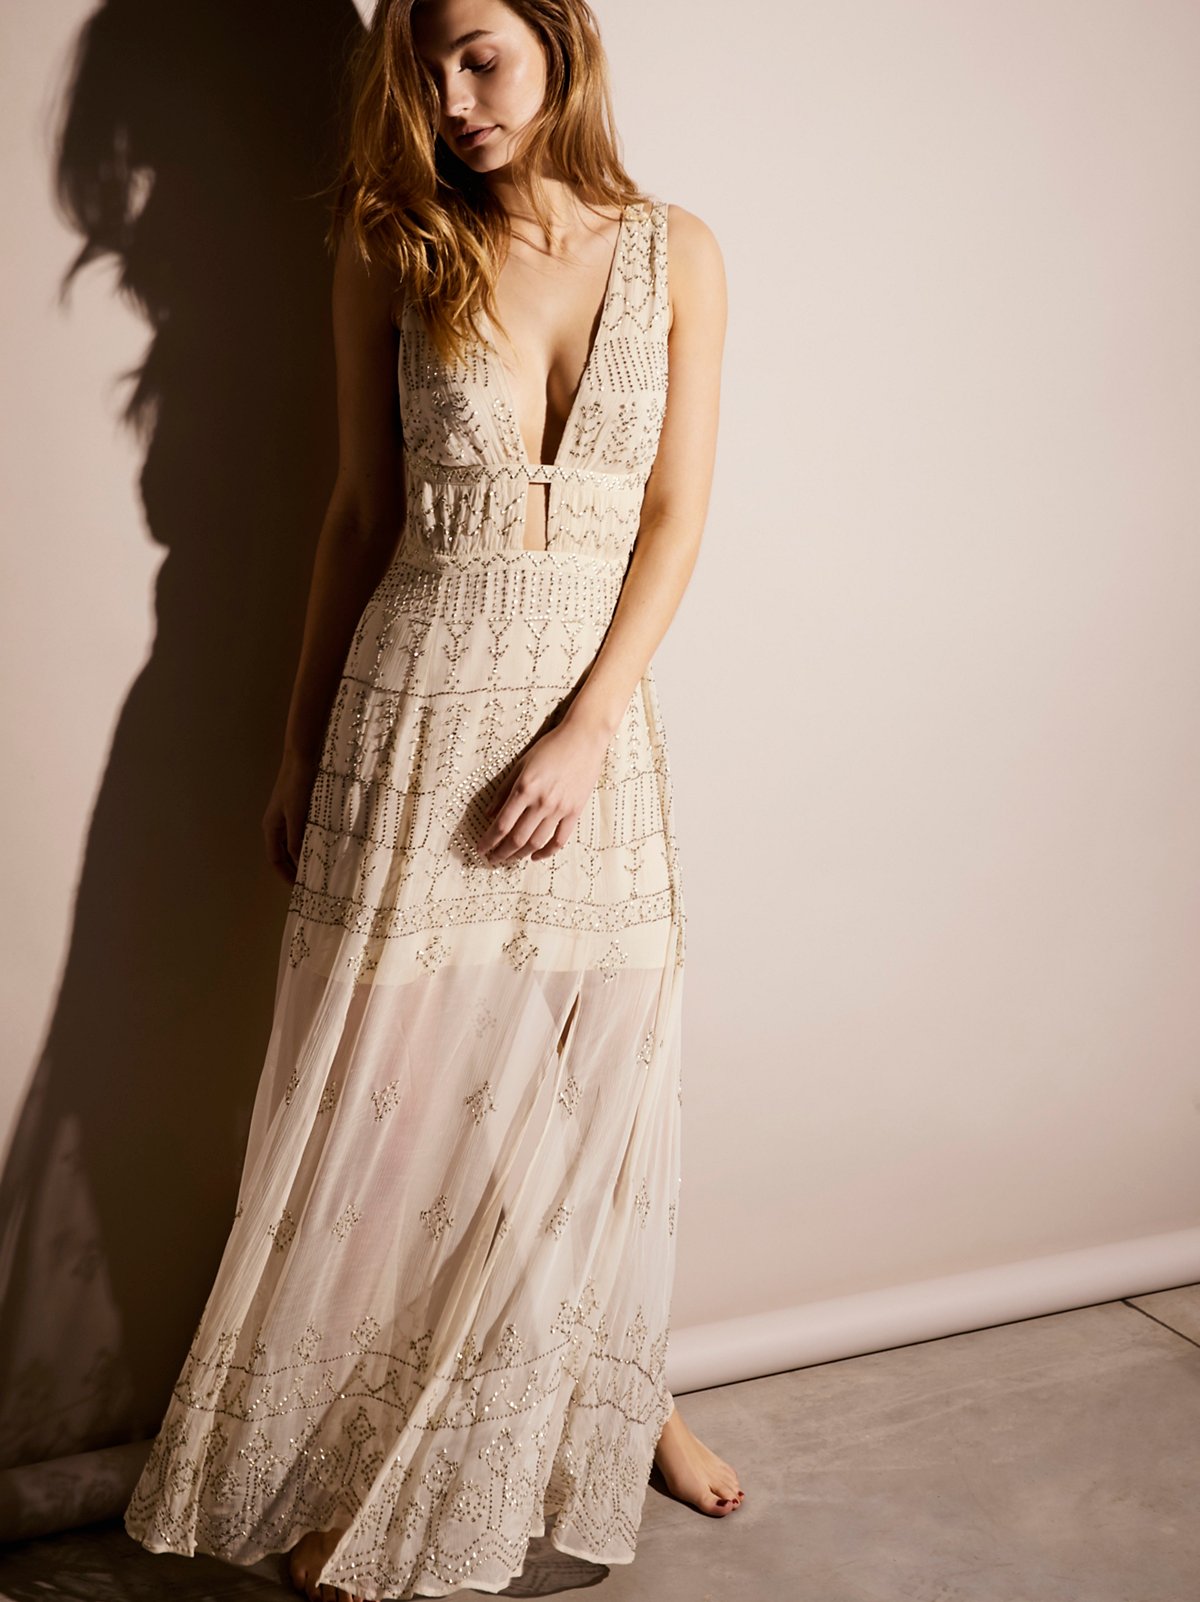 https://www.freepeople.com/shop/carolyns-limited-edition-white-dress-41343880/